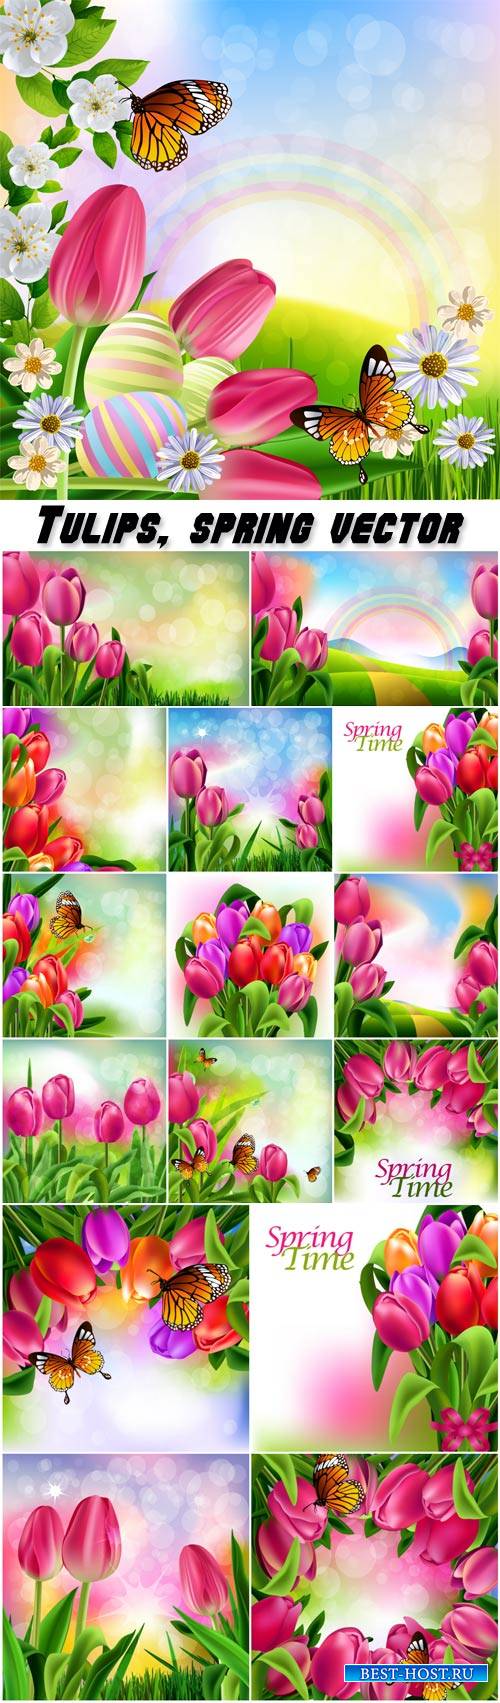 Tulips, spring vector backgrounds